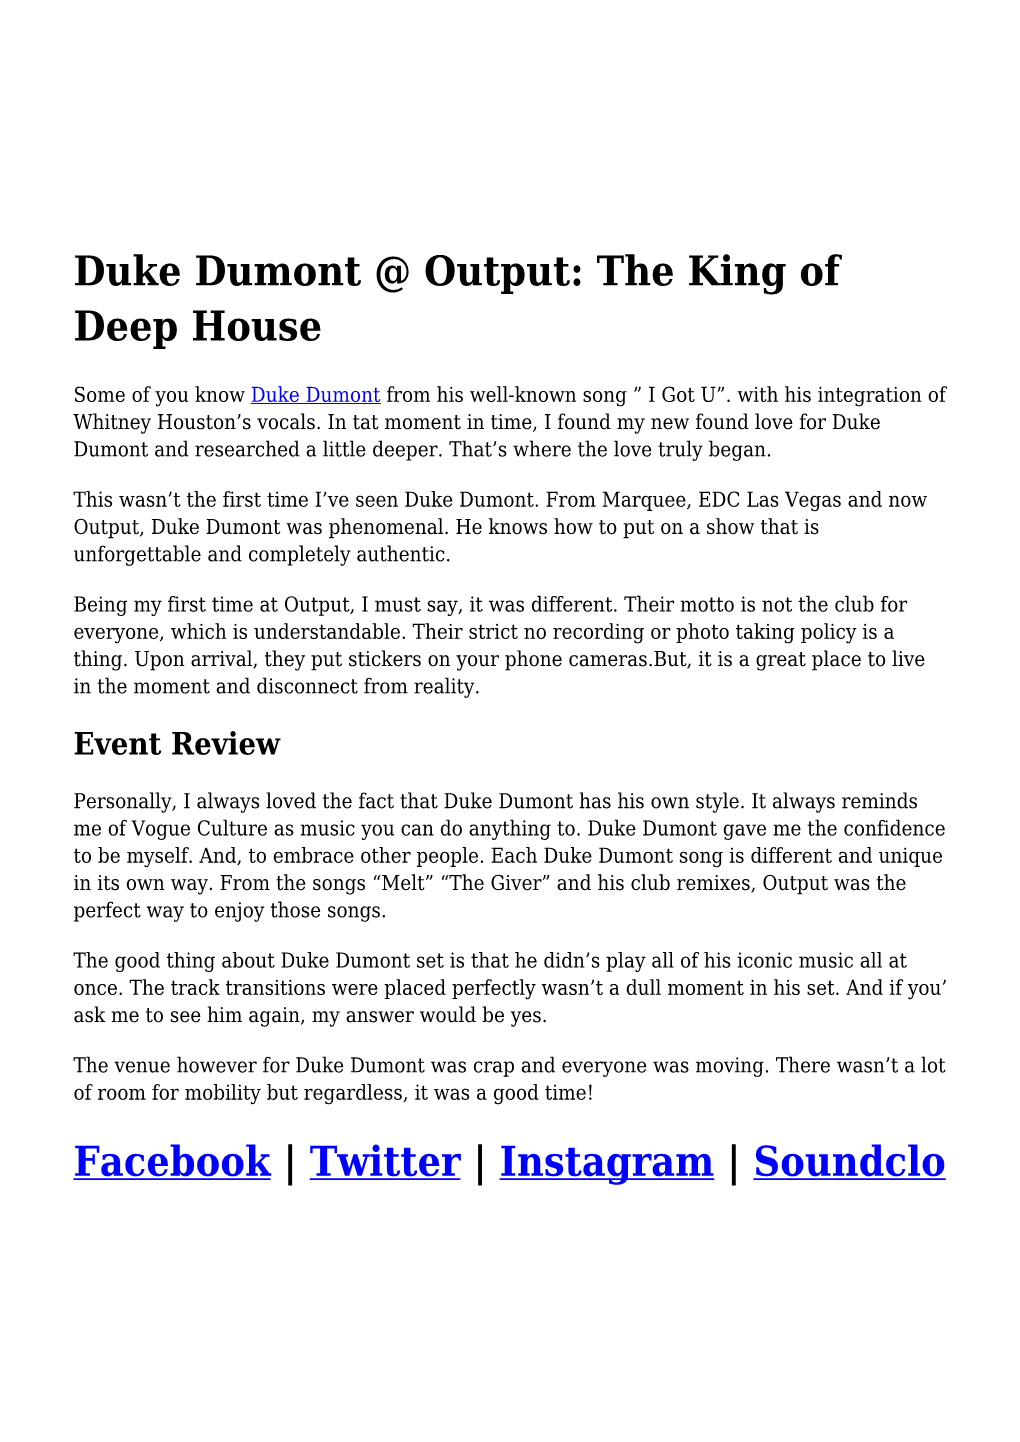 [Event Review] Duke Dumont @ Output: the King of Deep House